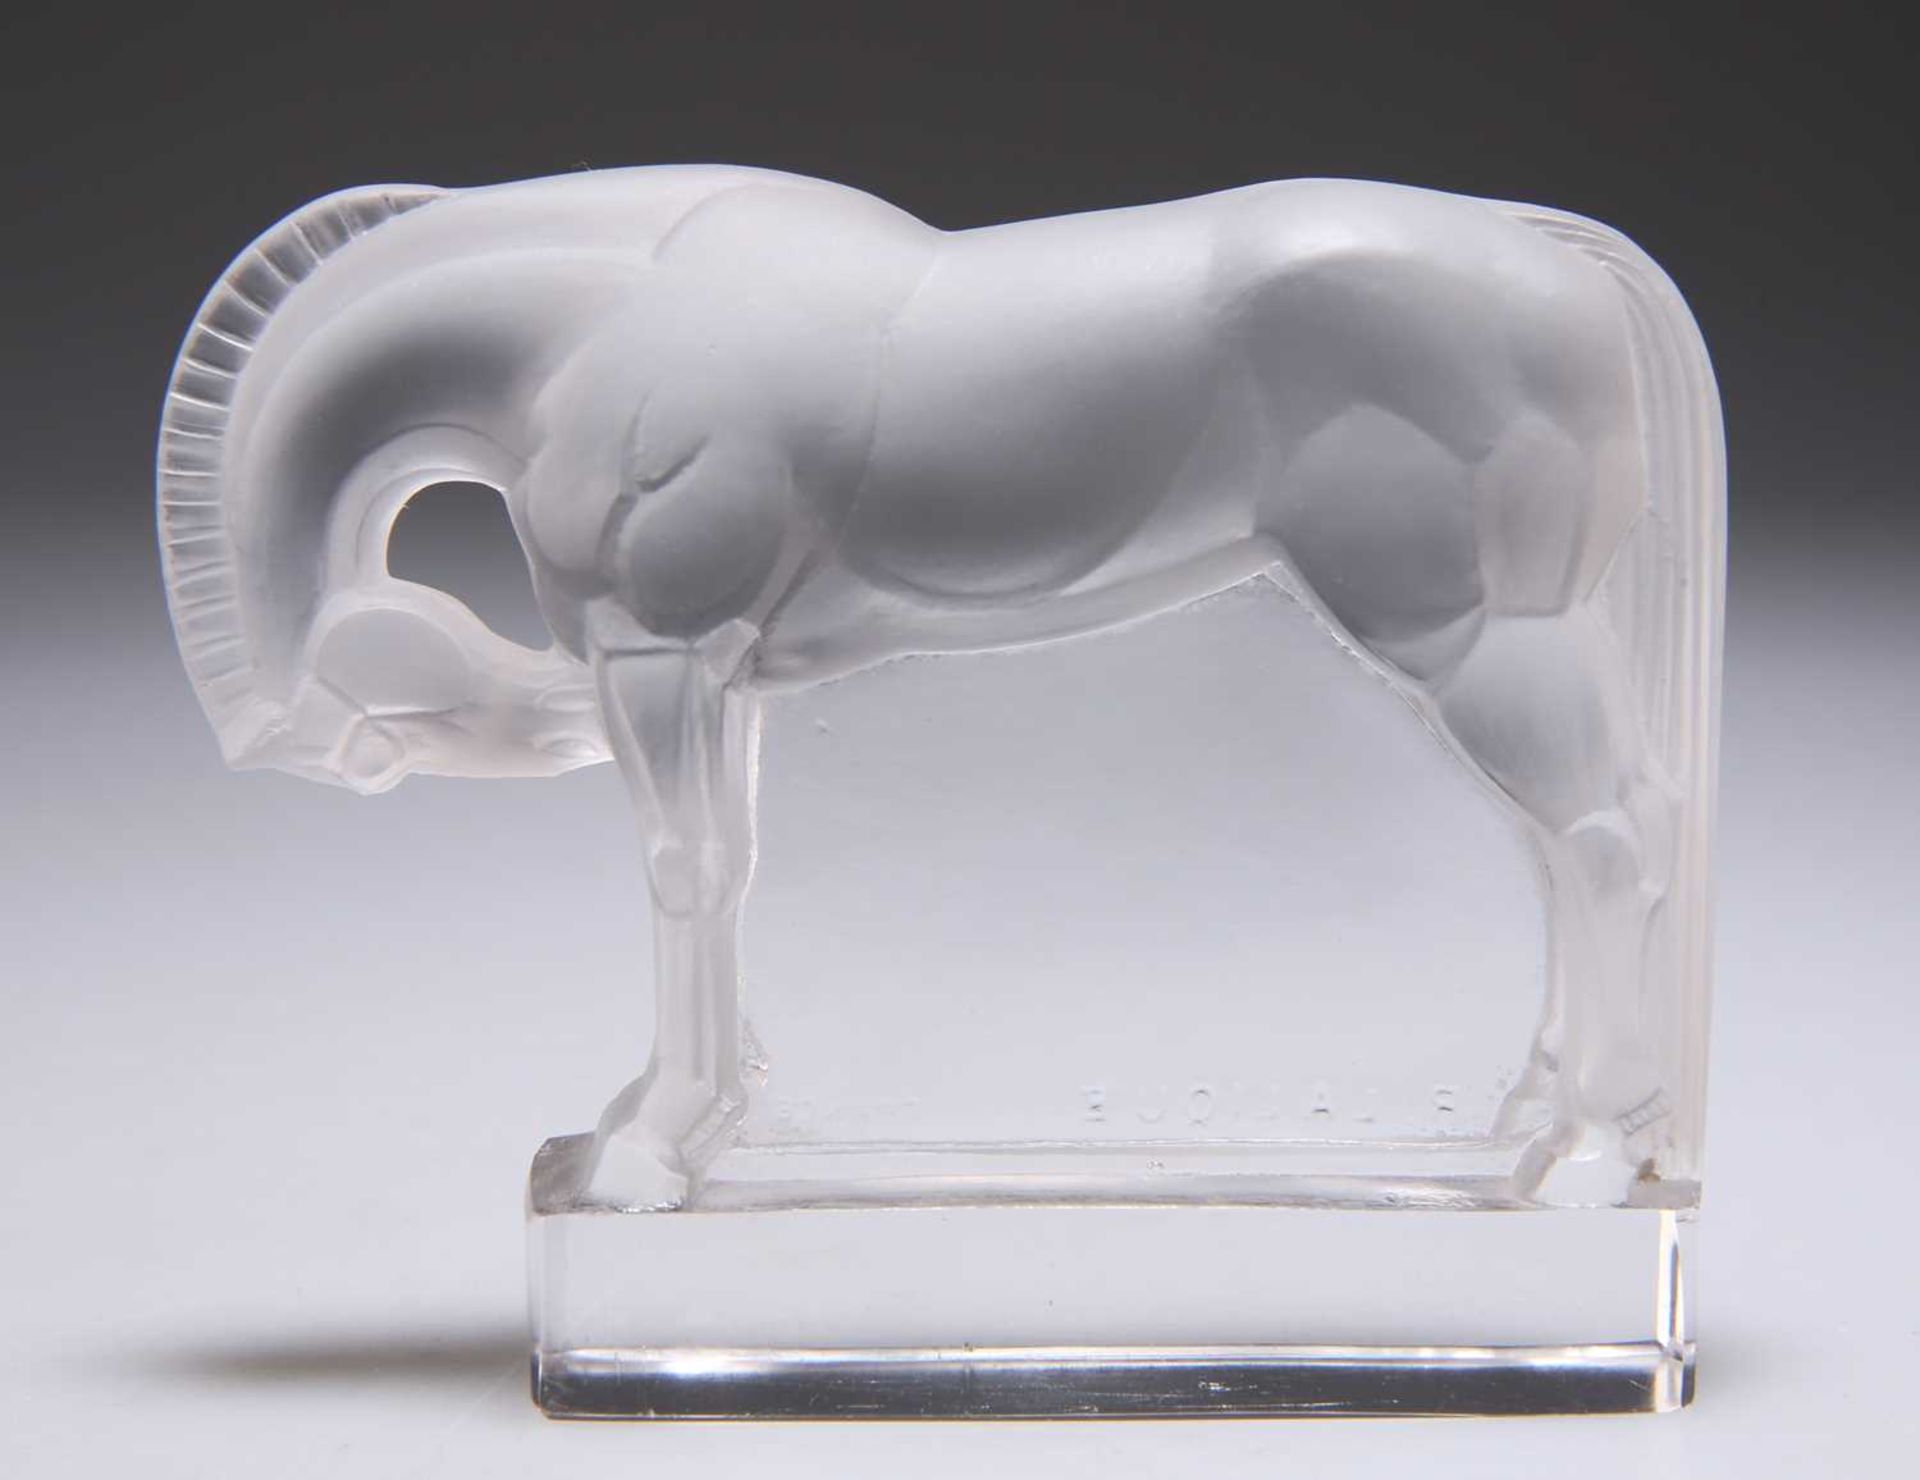 RENÉ LALIQUE (FRENCH, 1860-1945), A CHEVAL PAPERWEIGHT - Image 2 of 3